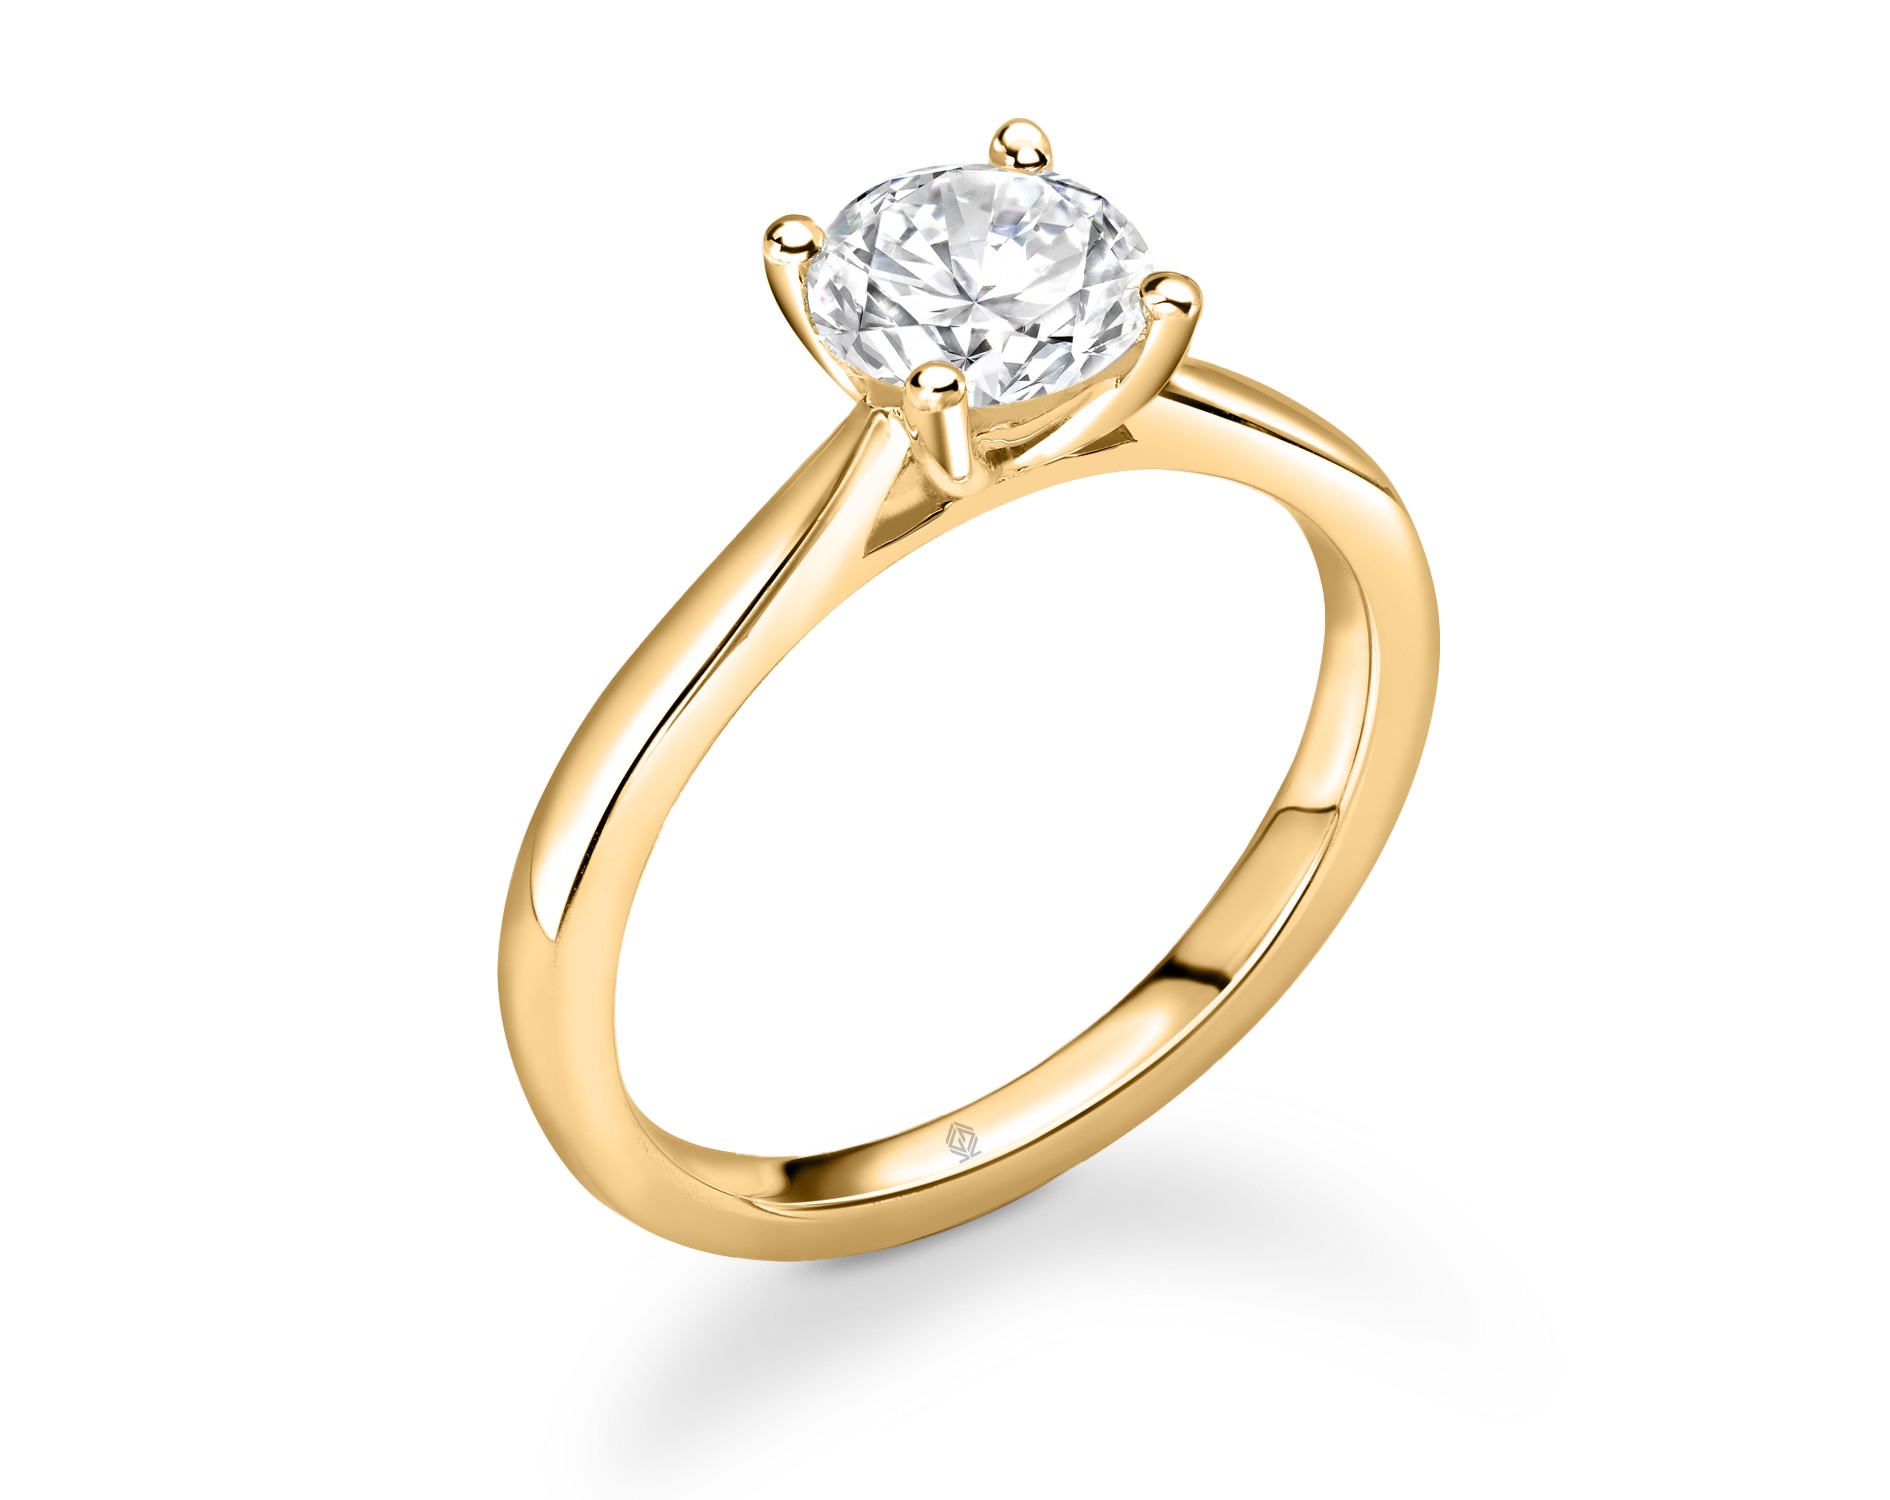 18K YELLOW GOLD GOLD 4 PRONGS SOLITAIRE ROUND CUT DIAMOND ENGAGEMENT RING